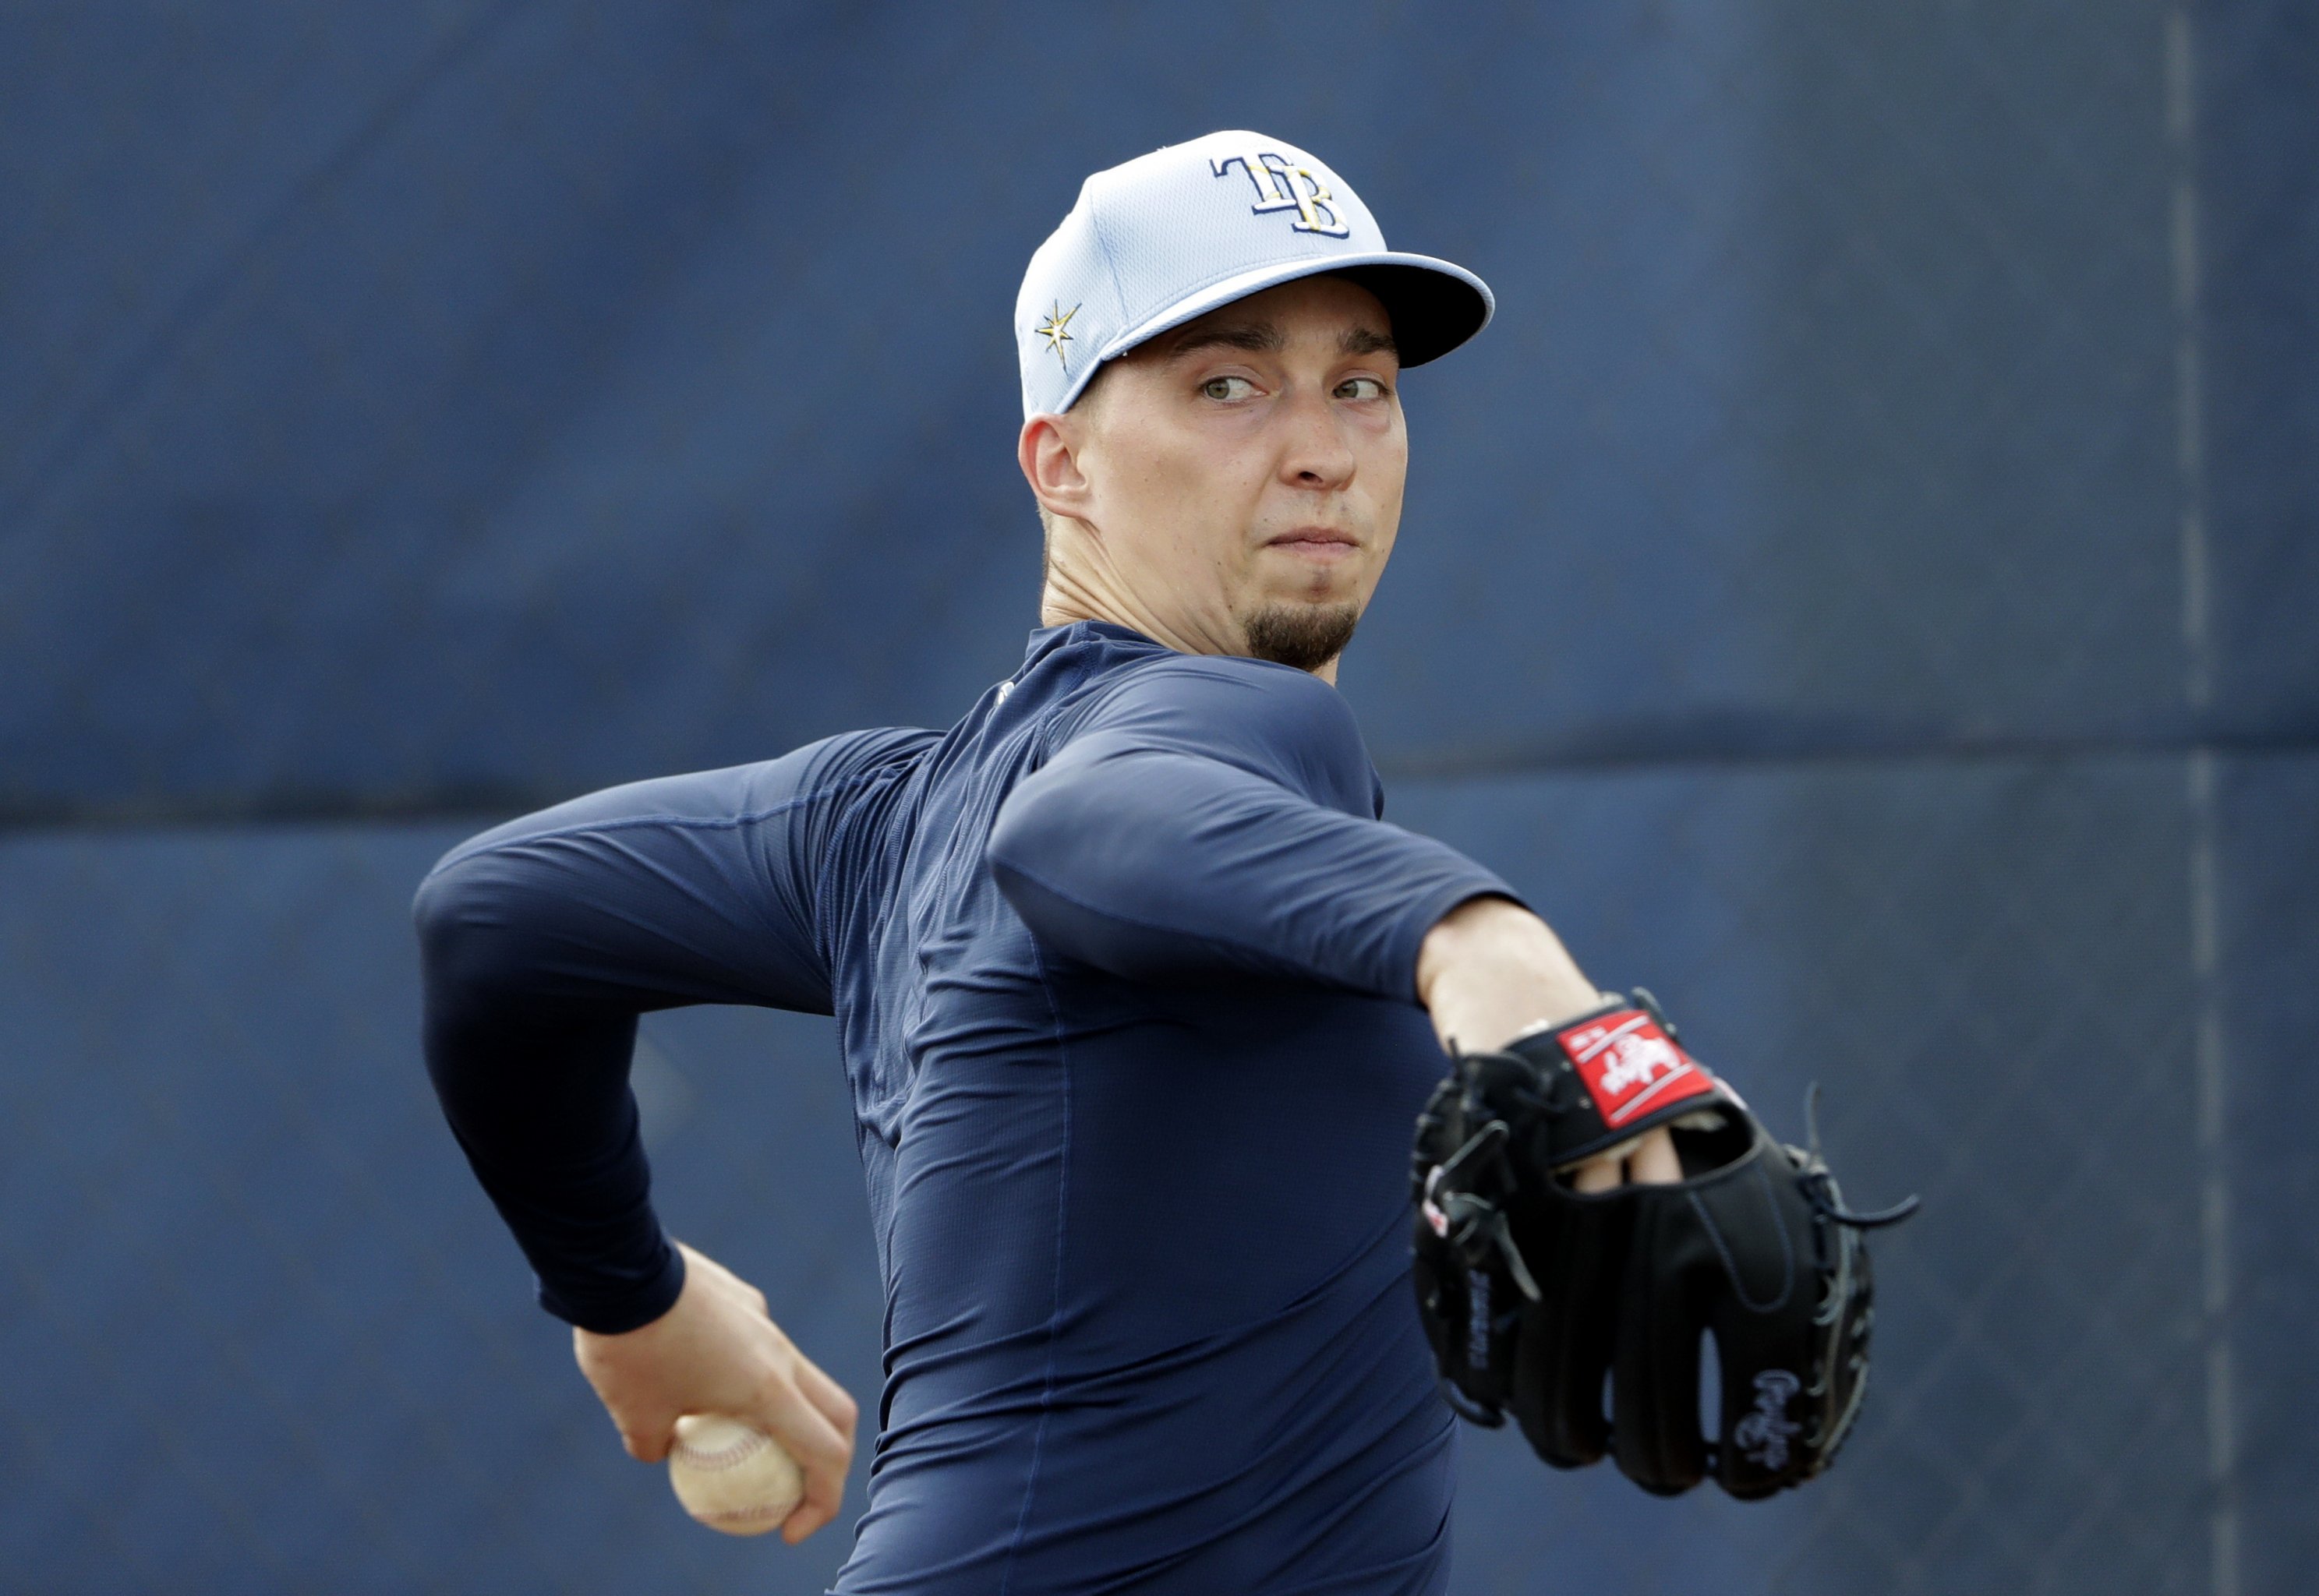 Tampa Bay Rays' Blake Snell Captures AL Cy Young Award